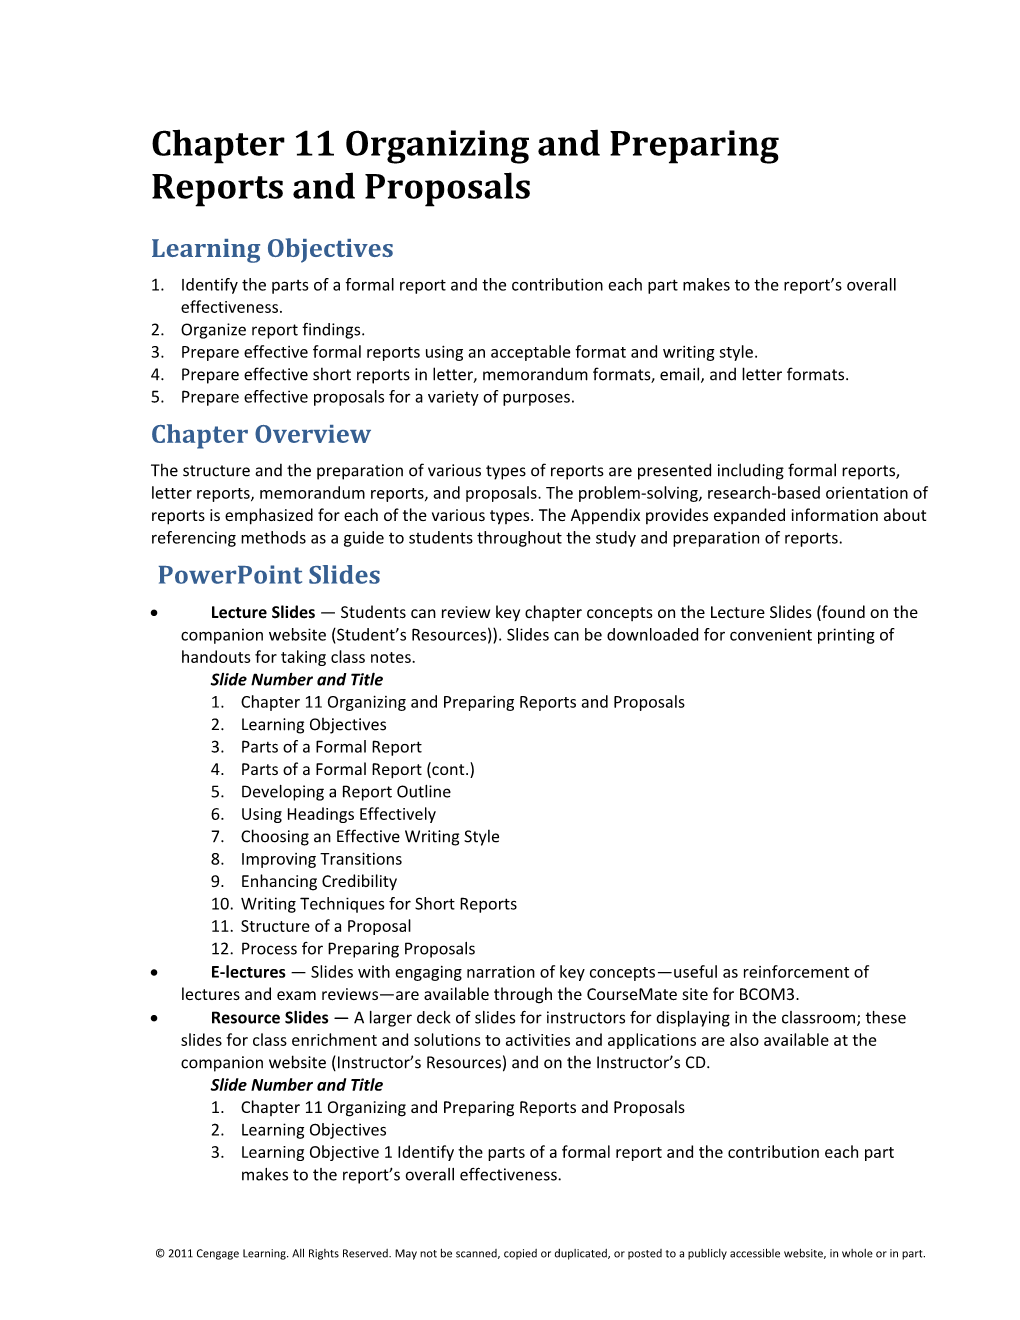 Chapter 11 Organizing and Preparing Reports and Proposals